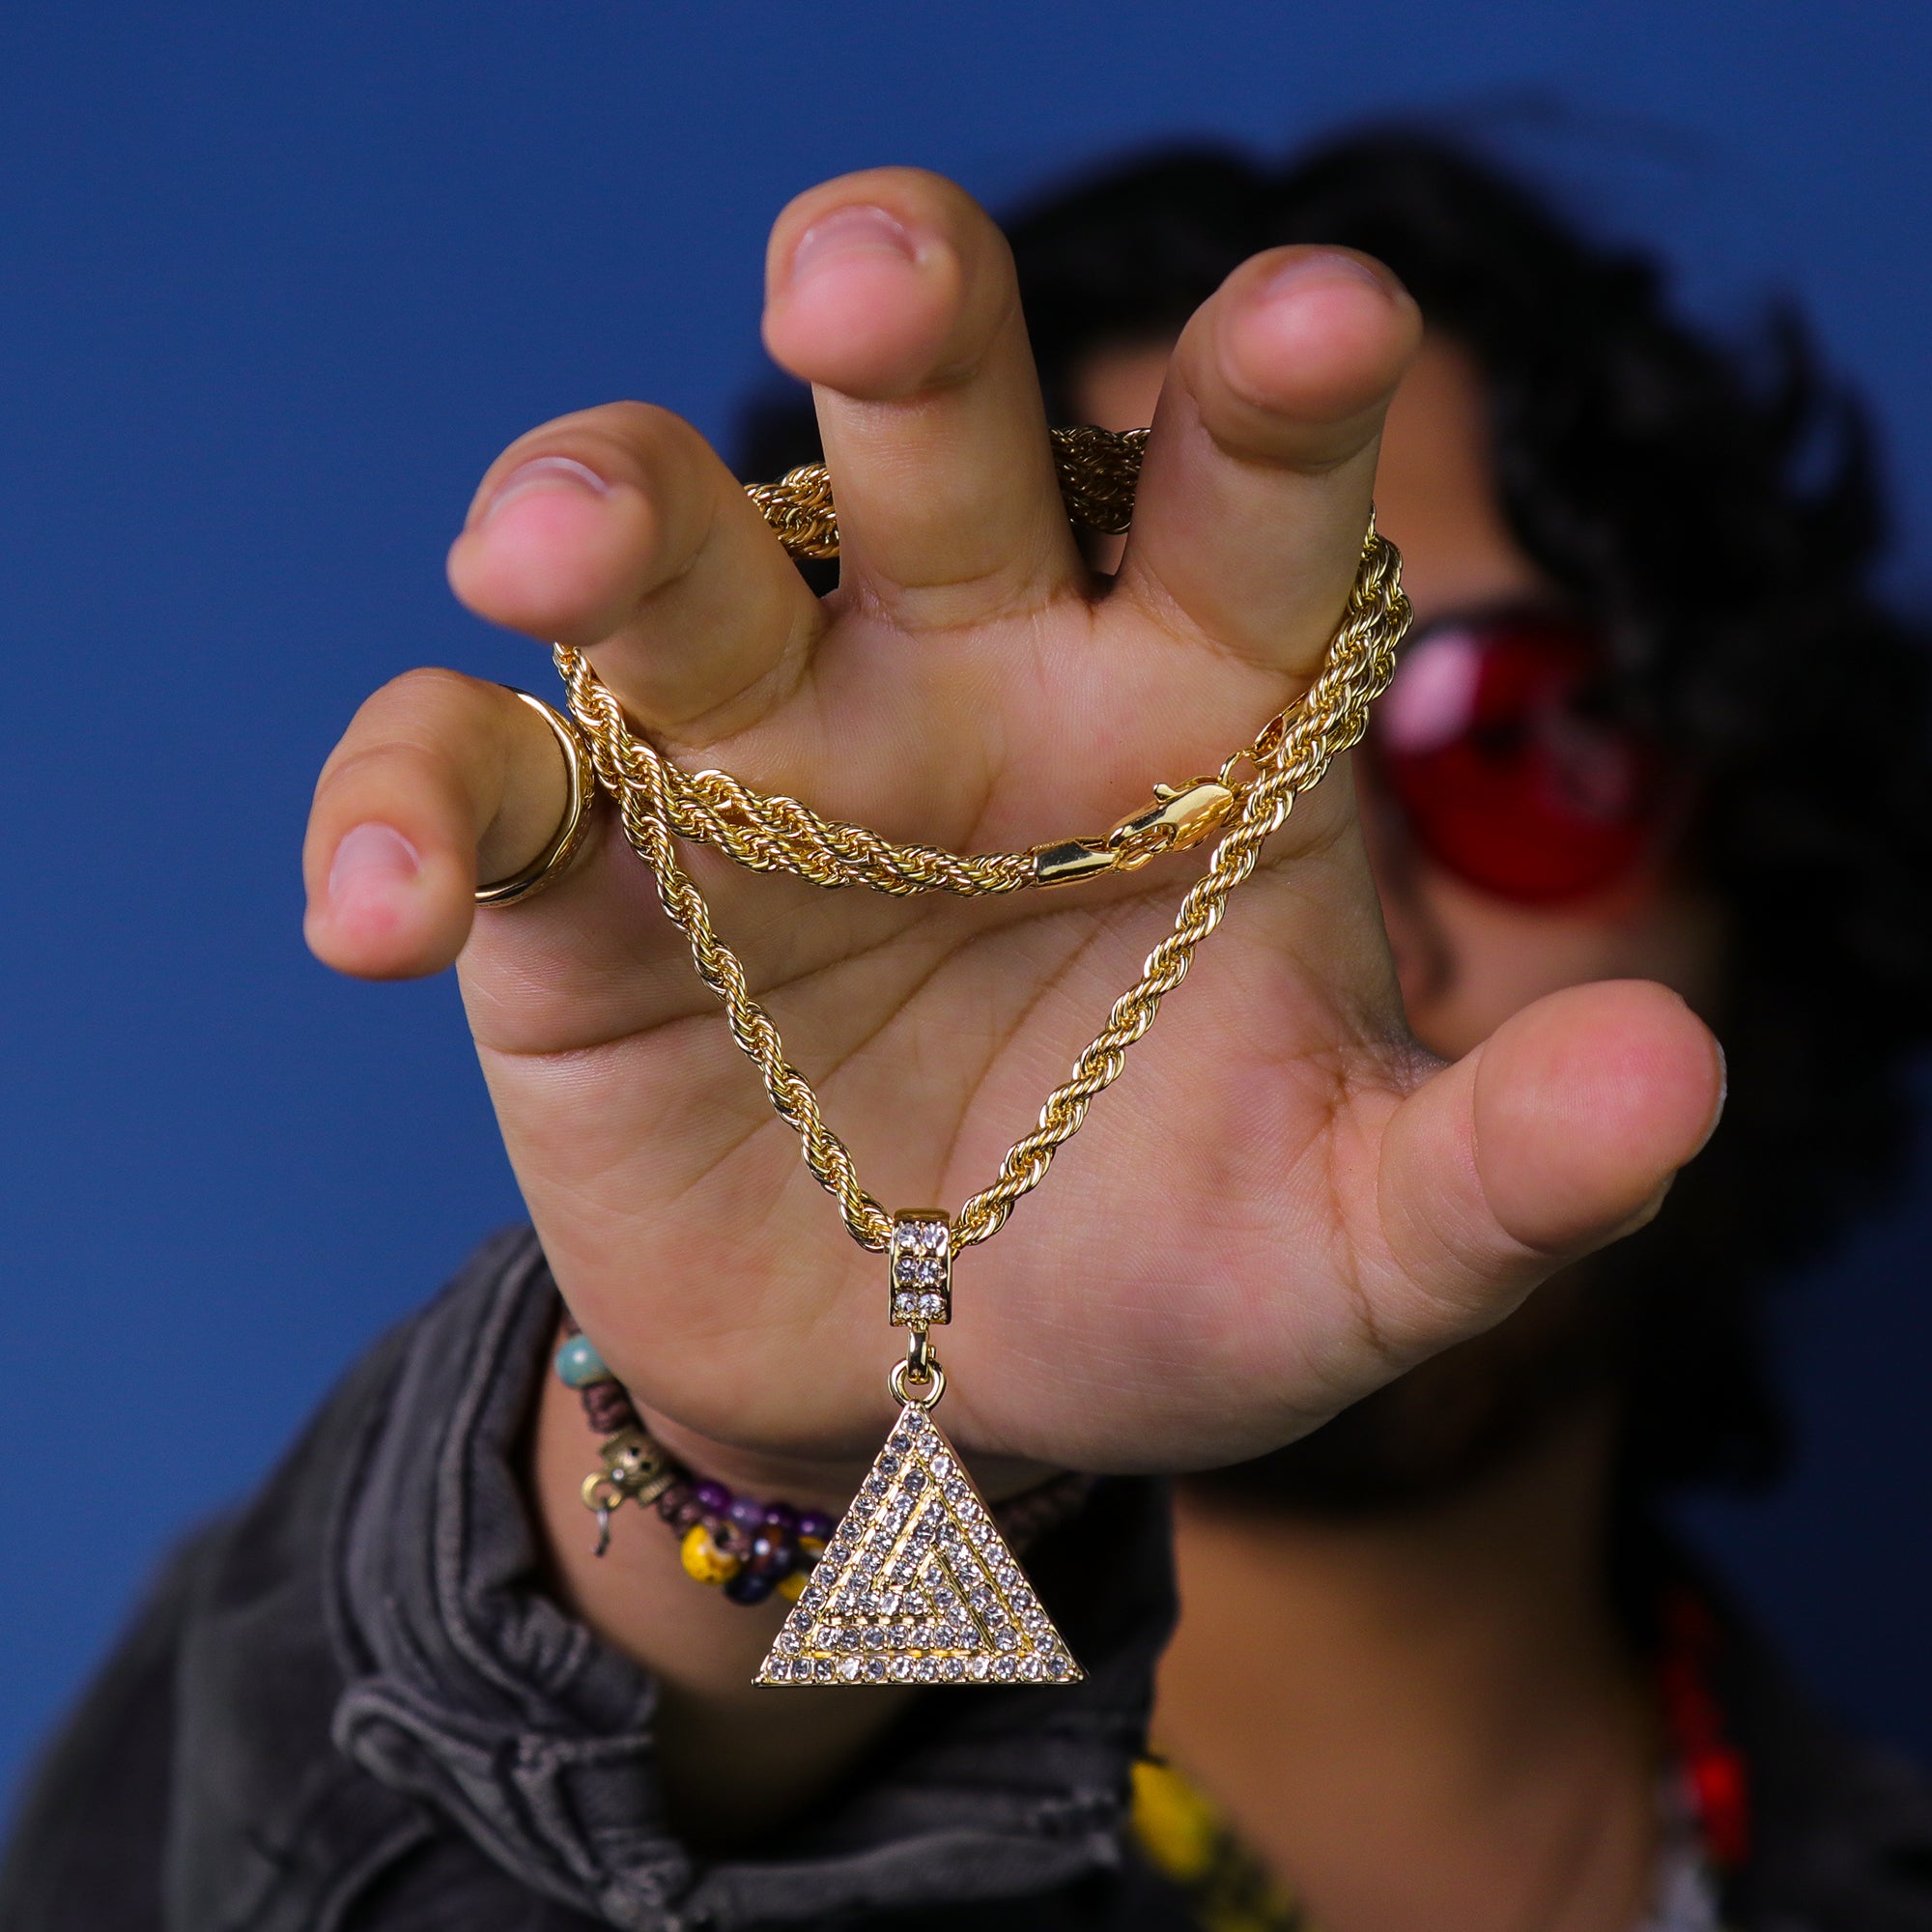 Triangle Pattern Pyramid Pendant 24" Rope Chain Hip Hop 18k Jewelry